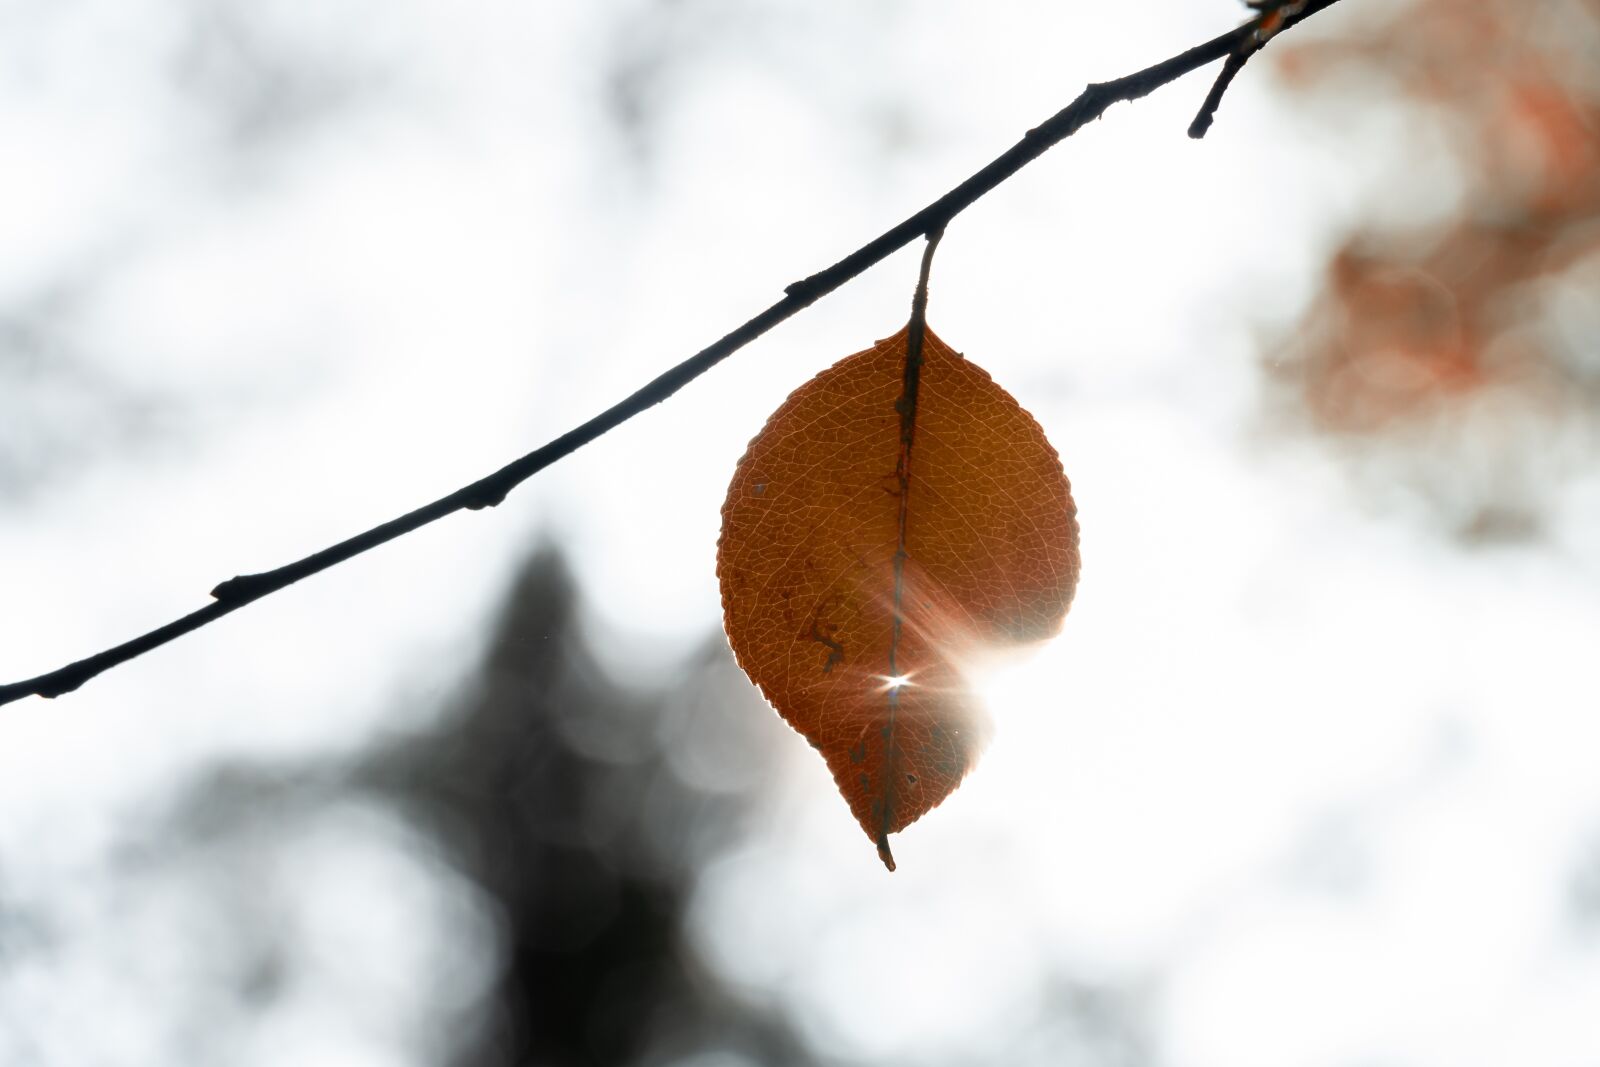 Sony a6400 sample photo. Autumn, leaves, nature photography